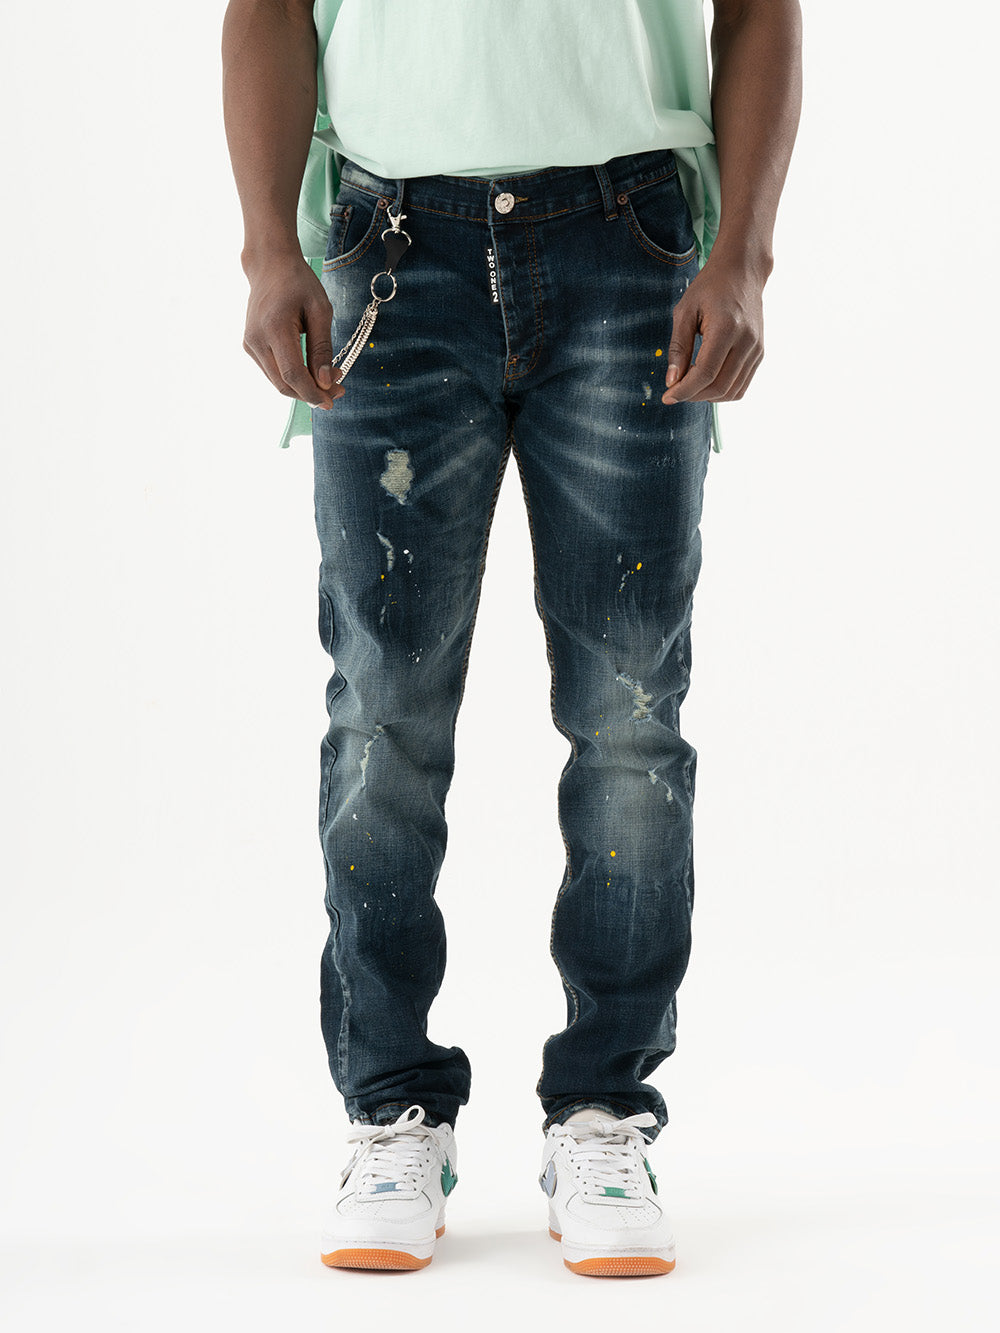 Skinny Distressed Jeans With Paint Splatter - Blue | KUDOS JEANS